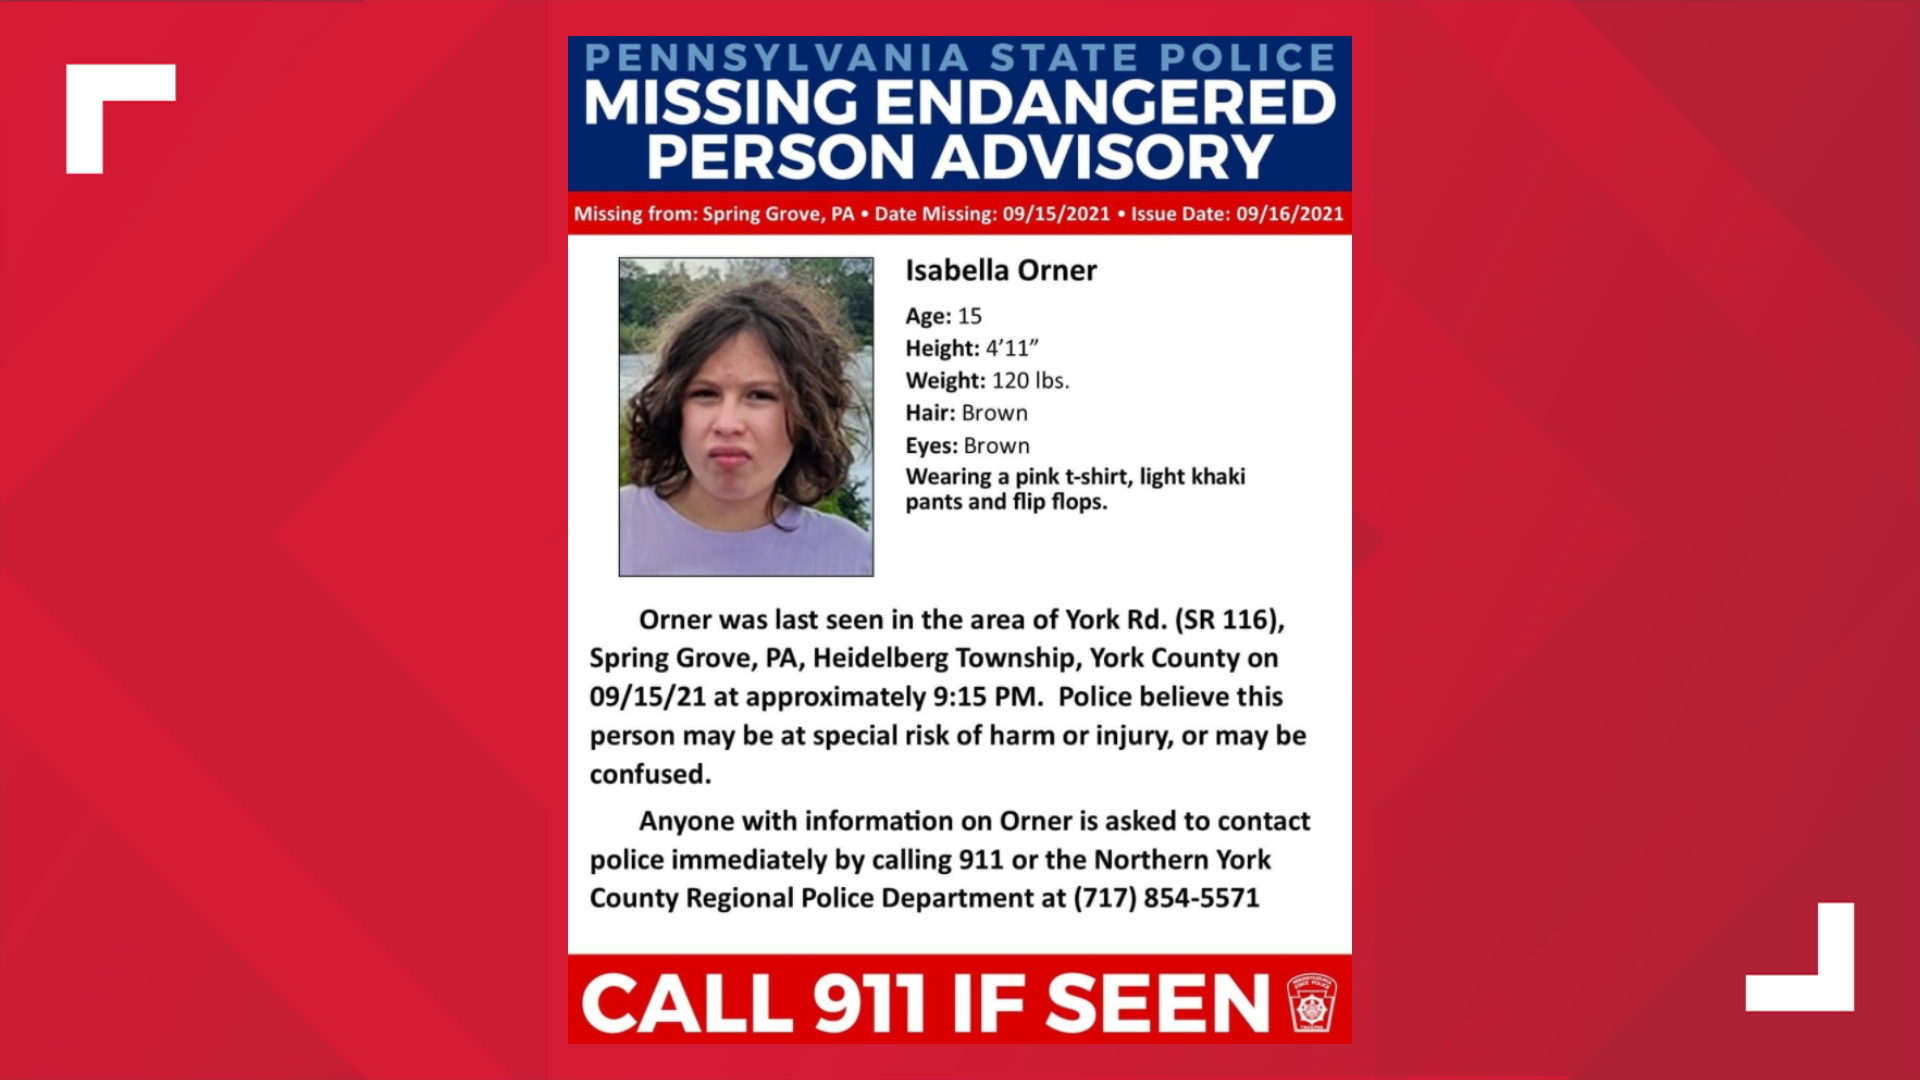 On Sept. 15 around 7 p.m., Isabella Orner, 15, was reported missing to Northern York County Regional Police. She was last seen in Heidelberg Township.